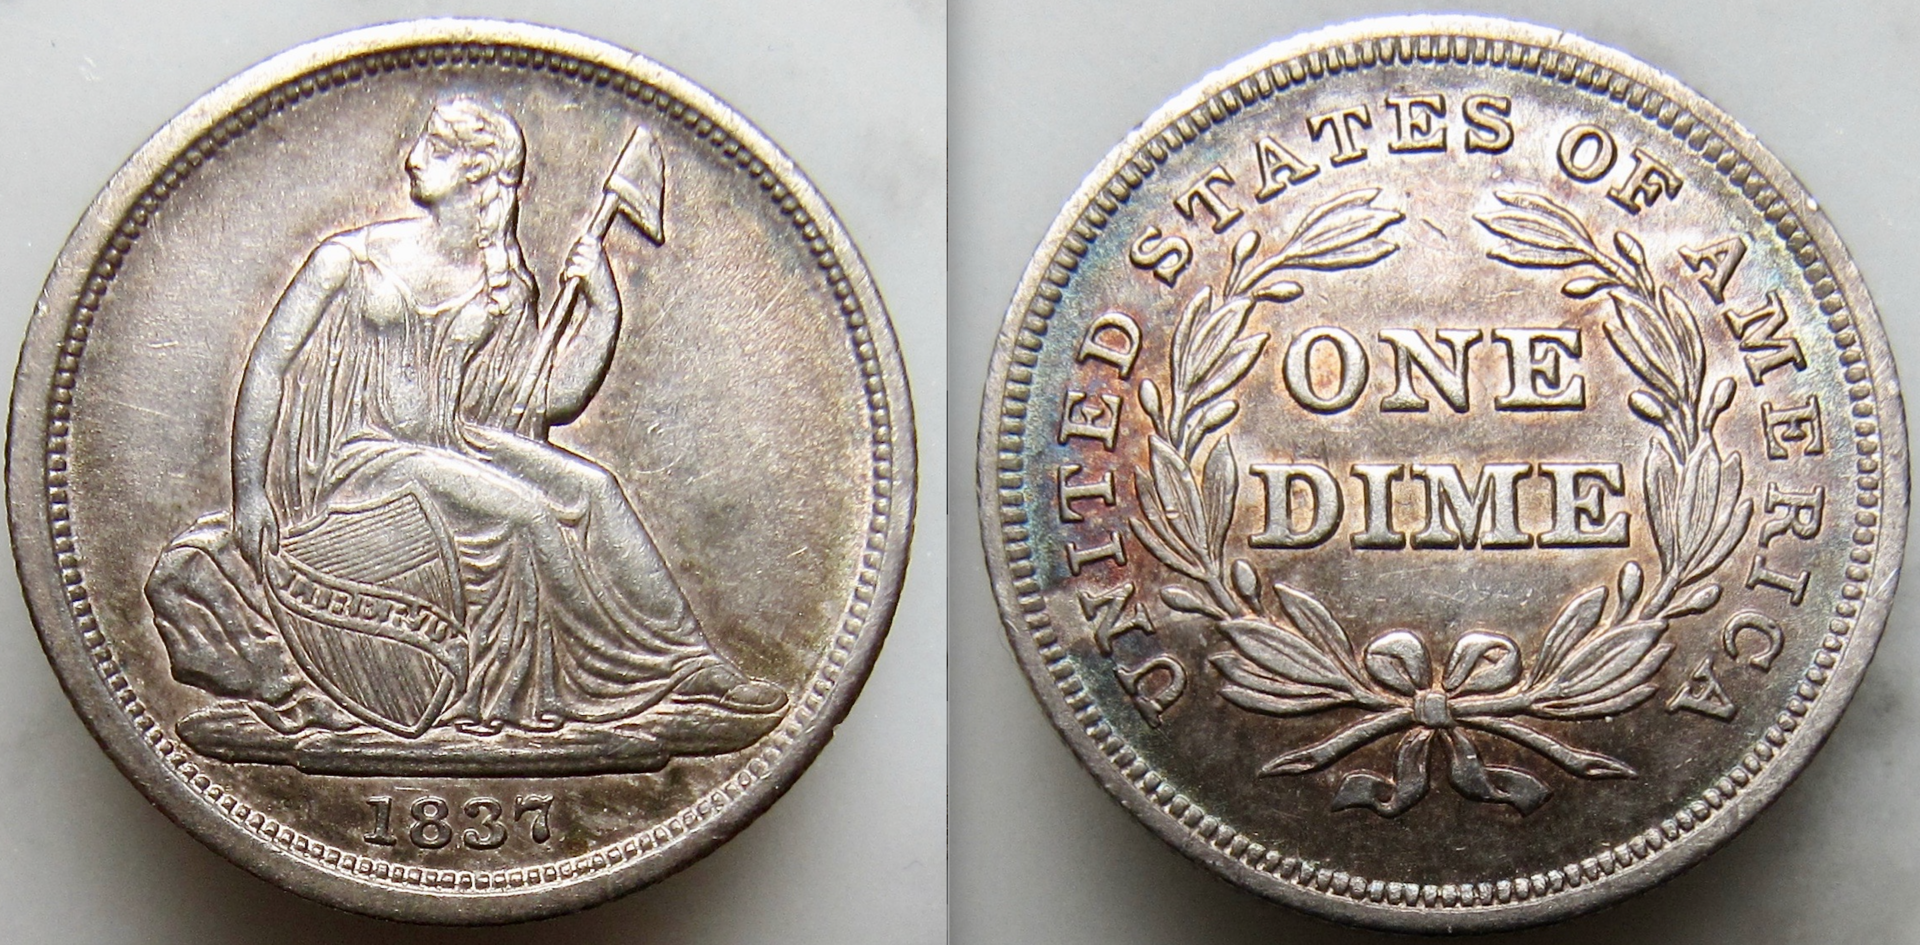 1837 dime - small date - OBV:REV - new pic 2019:20.png